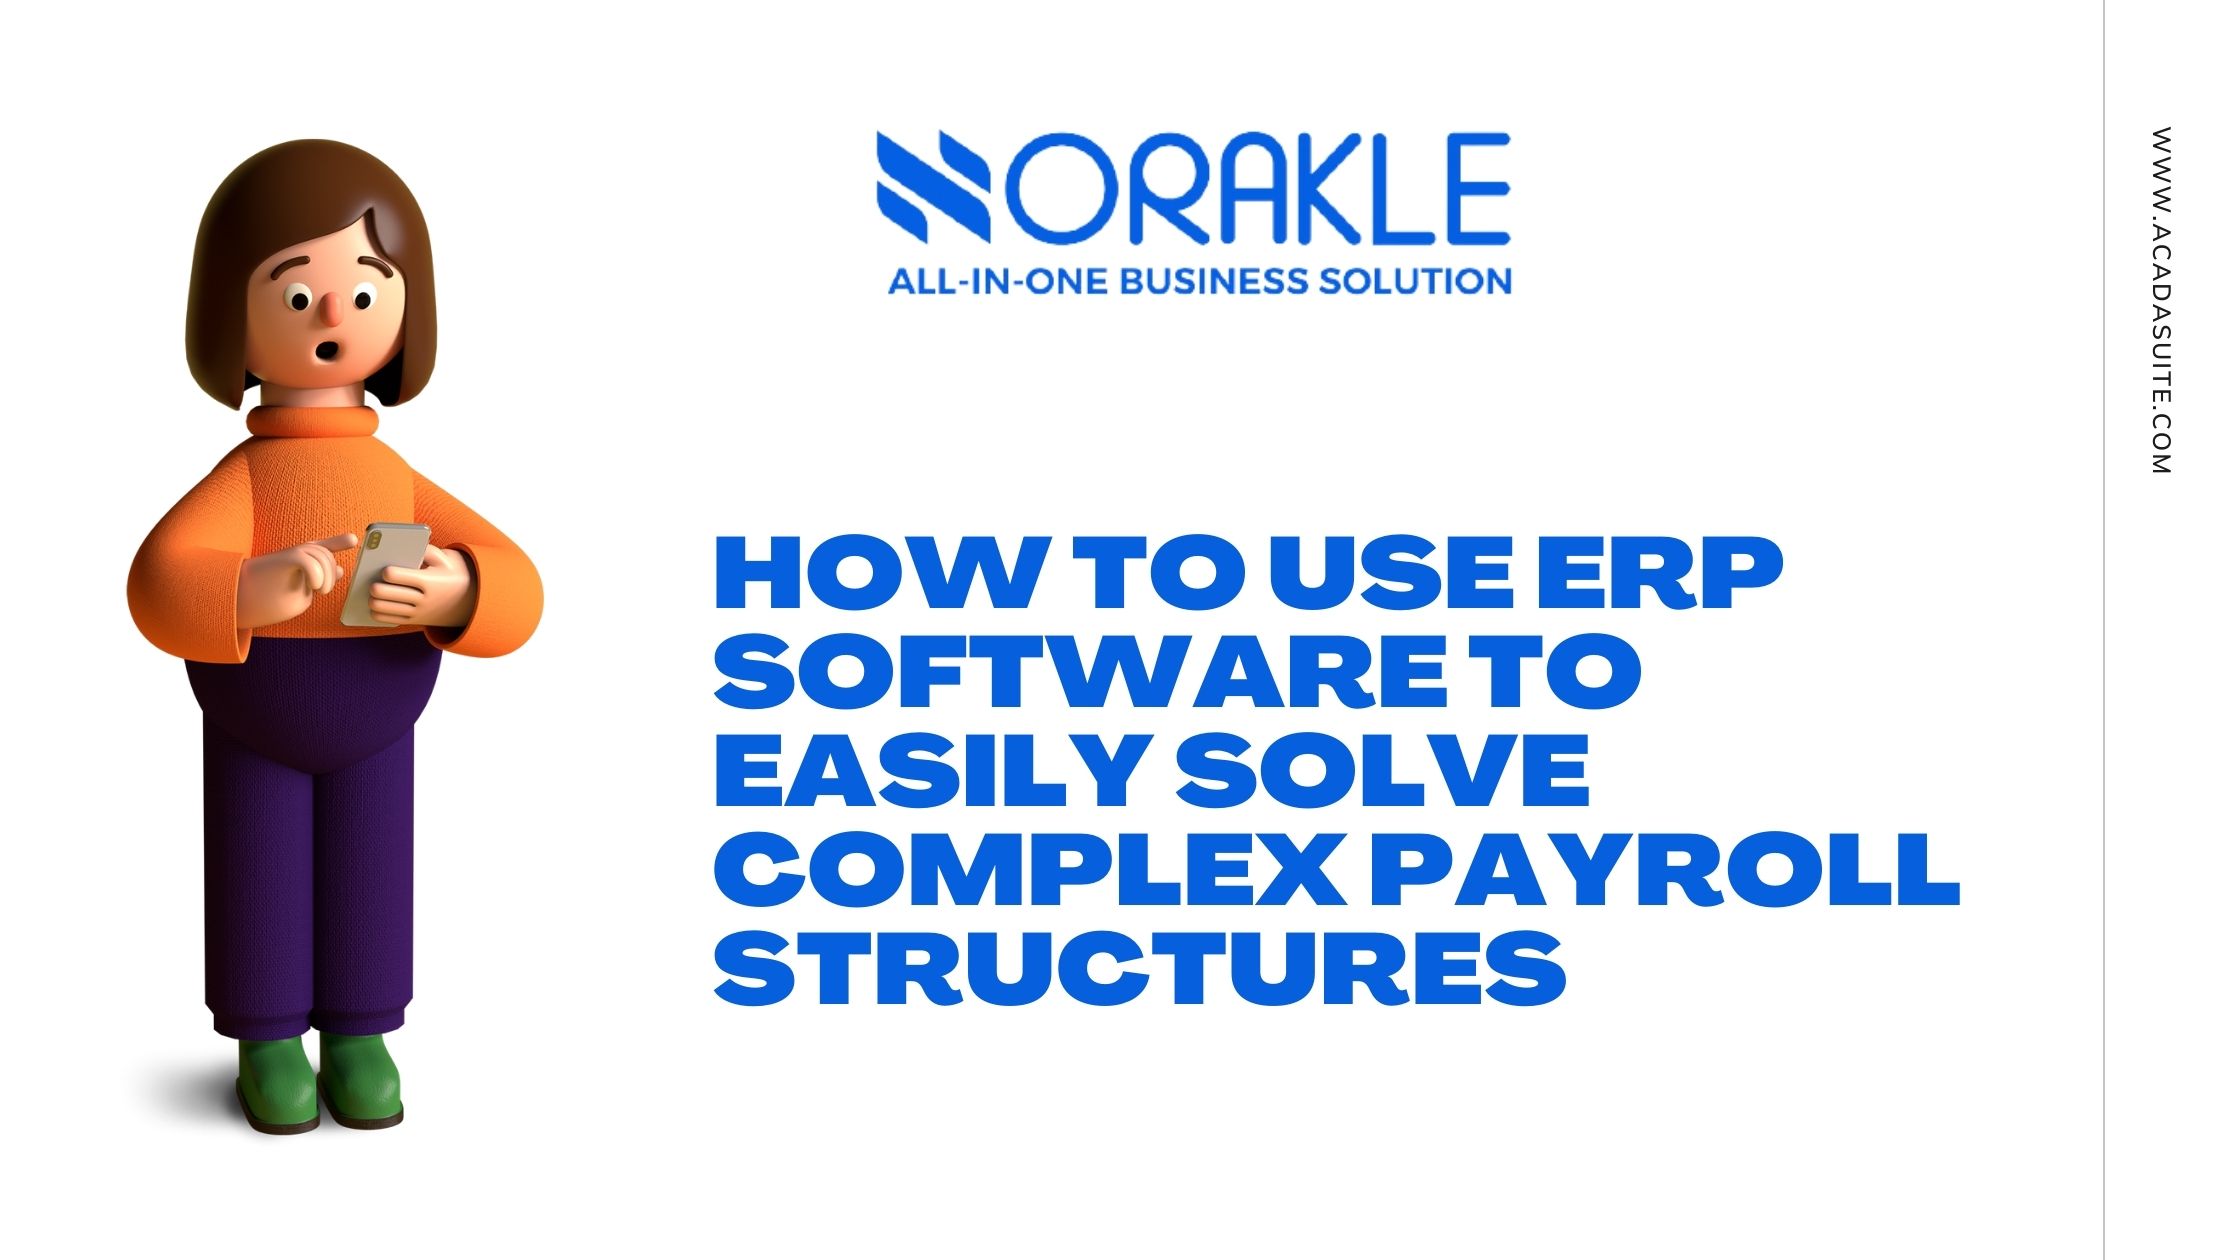 HOW TO USE ERP SOFTWARE TO EASILY SOLVE COMPLEX PAYROLL STRUCTURES